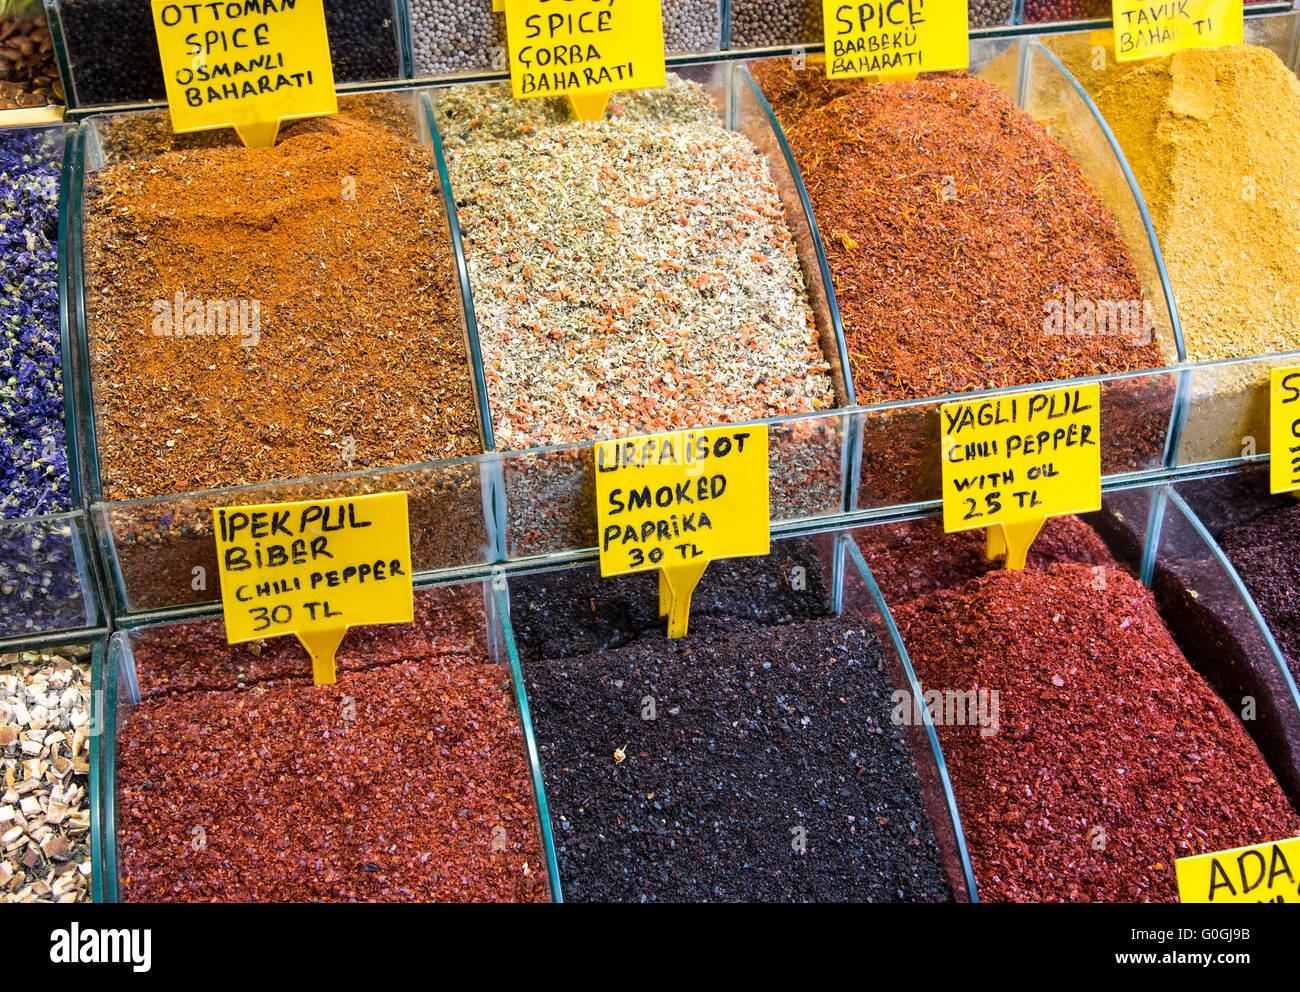 Pepper and other spices at the famous Spice Market in Istanbul Stock Photo